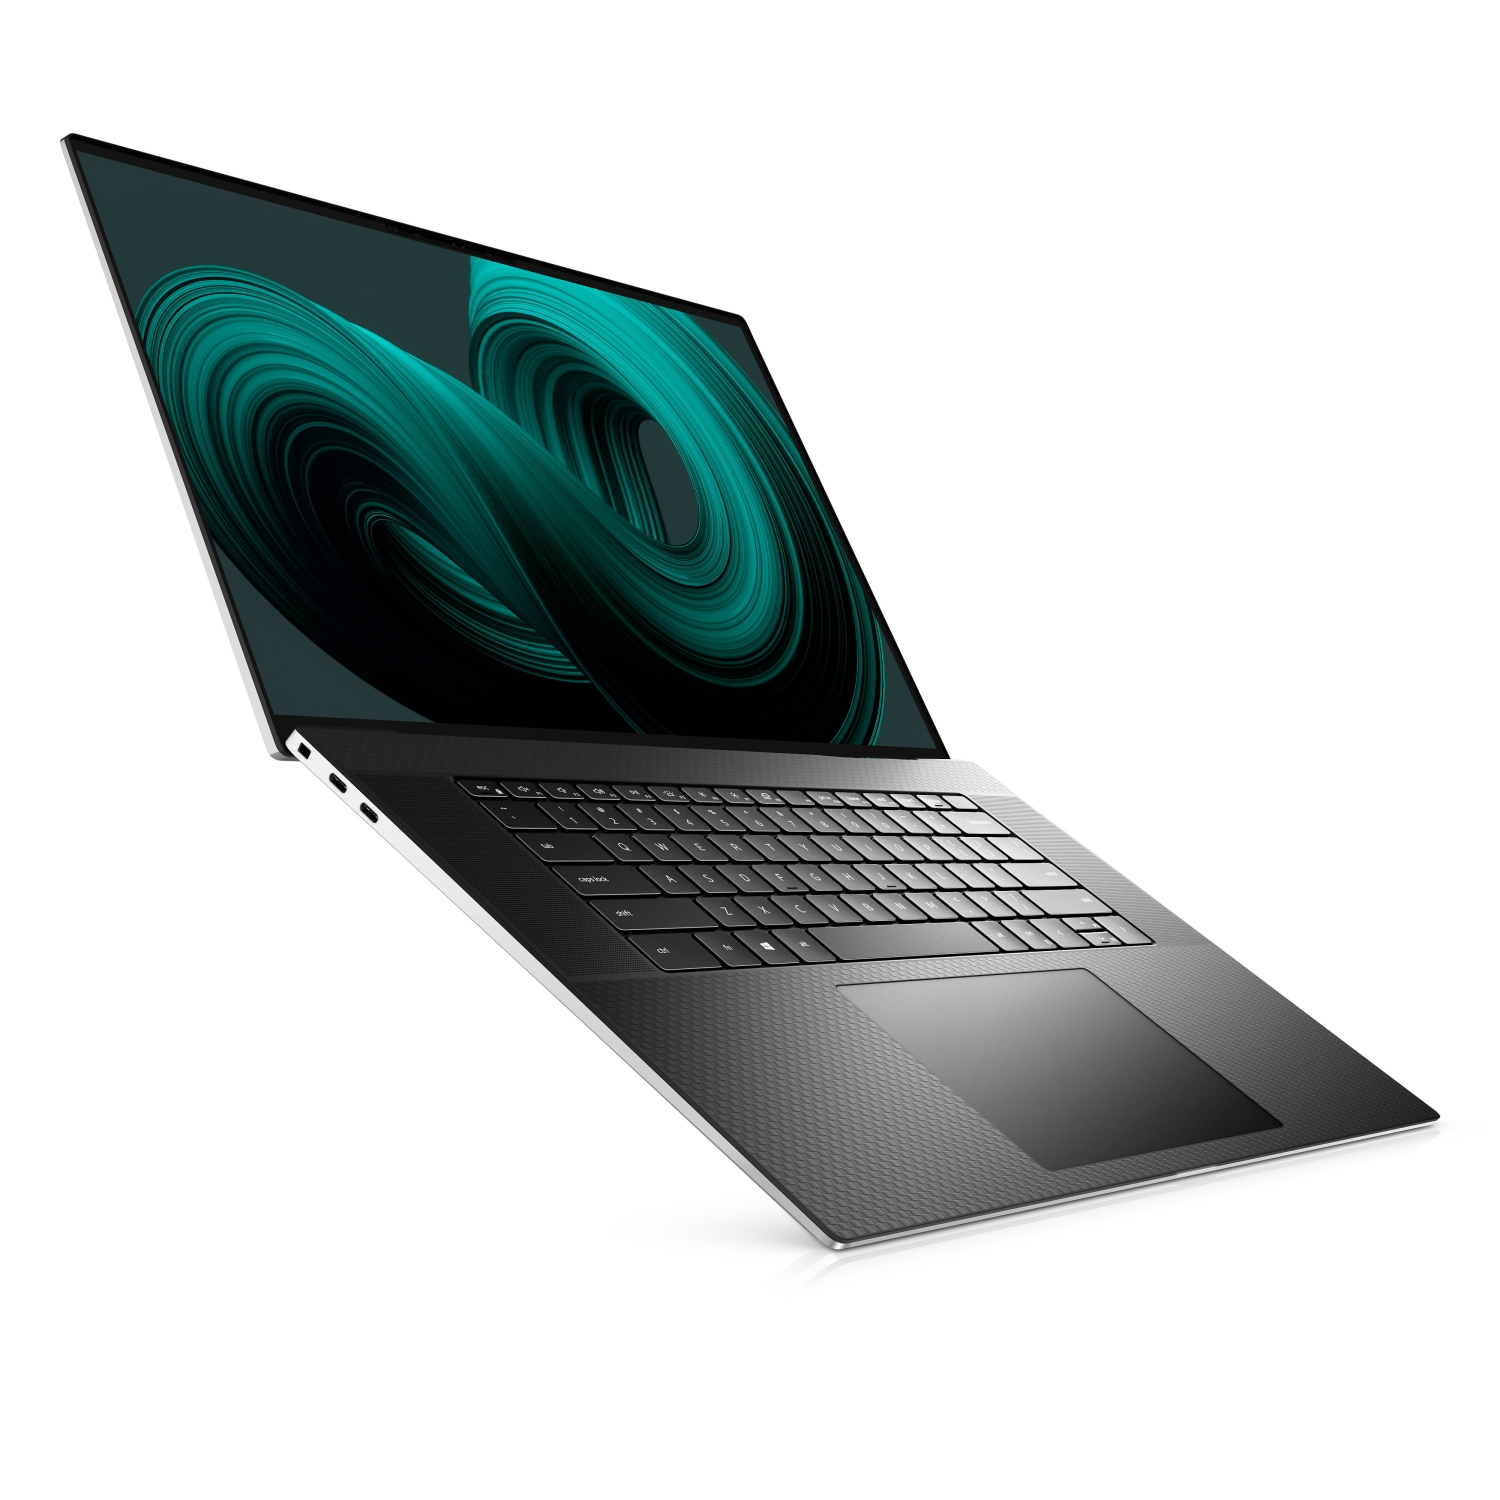 Refurbished (Excellent) - Dell XPS 17 9710 Laptop (2021) | 17" FHD+ | Core i7 - 1TB SSD - 32GB RAM - RTX 3050 | 8 Cores @ 4.6 GHz - 11th Gen CPU Certified Refurbished